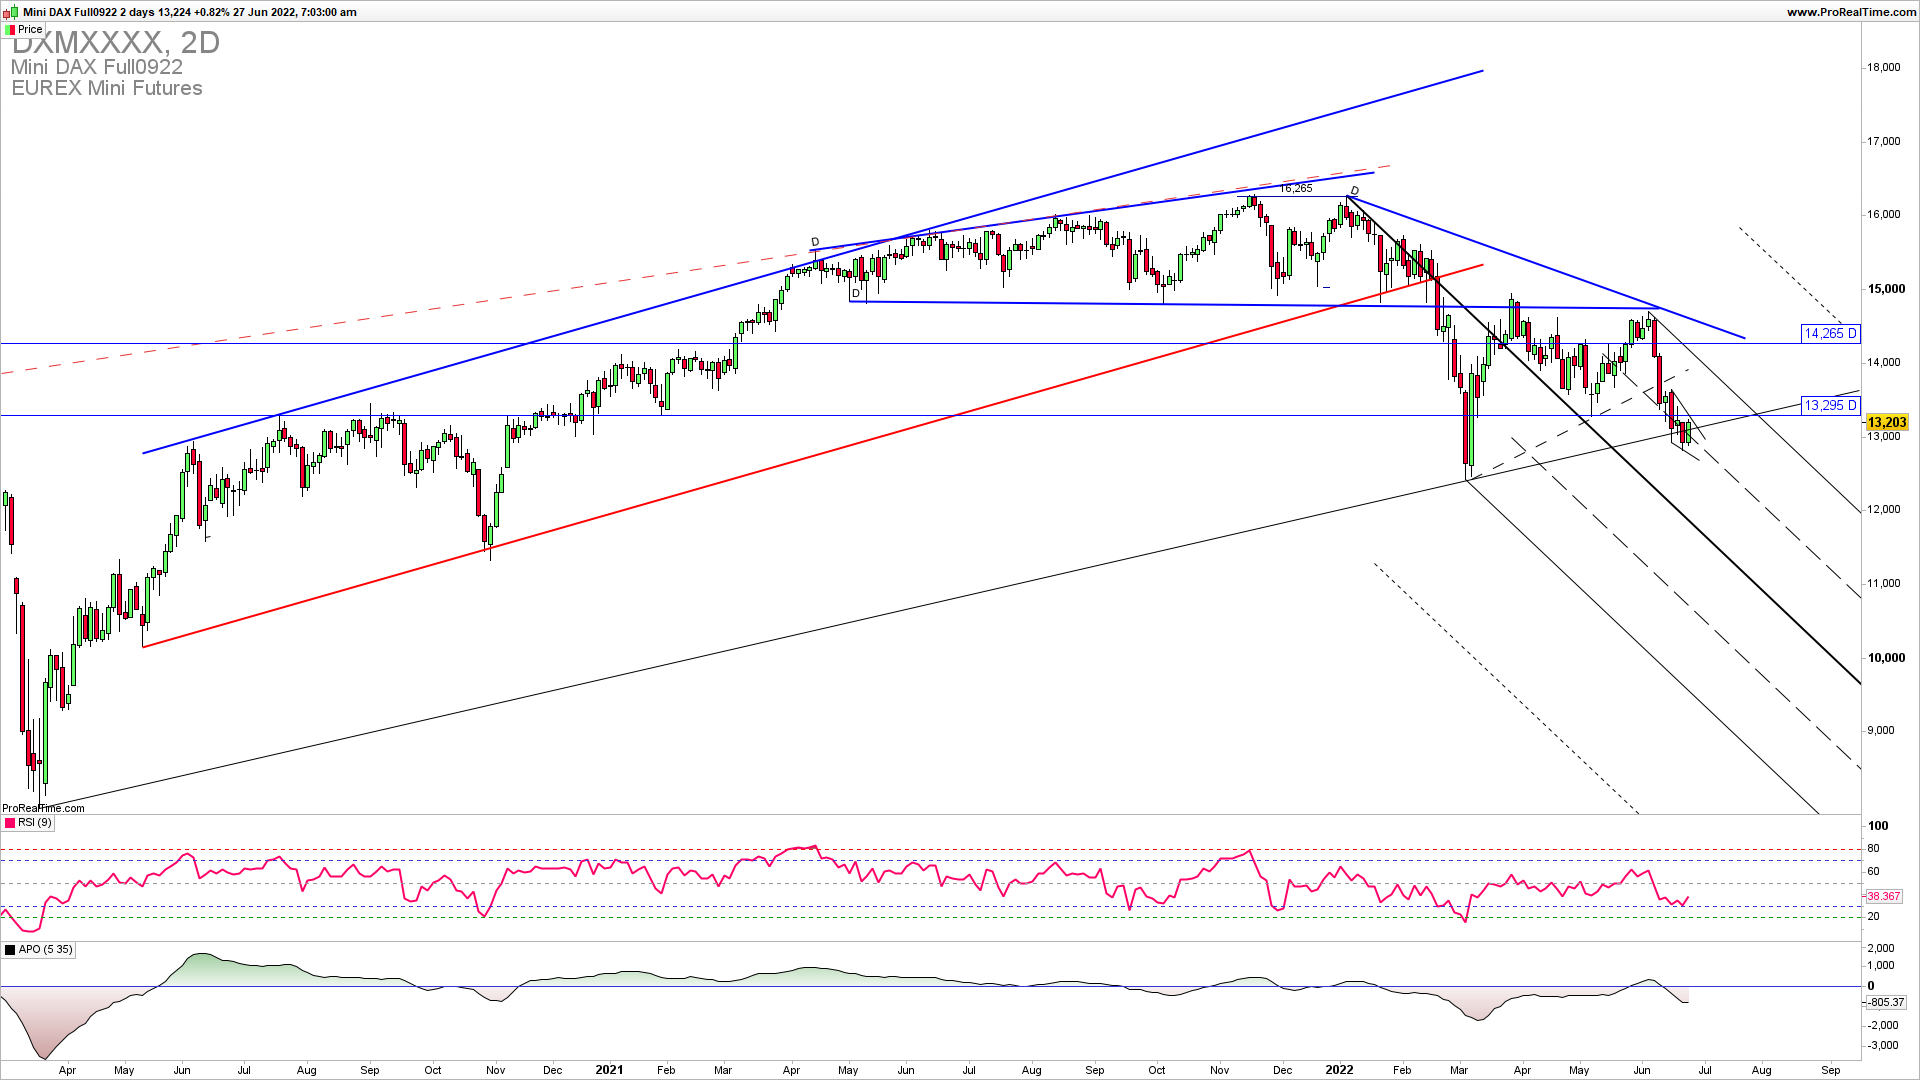 DAX downside continuation